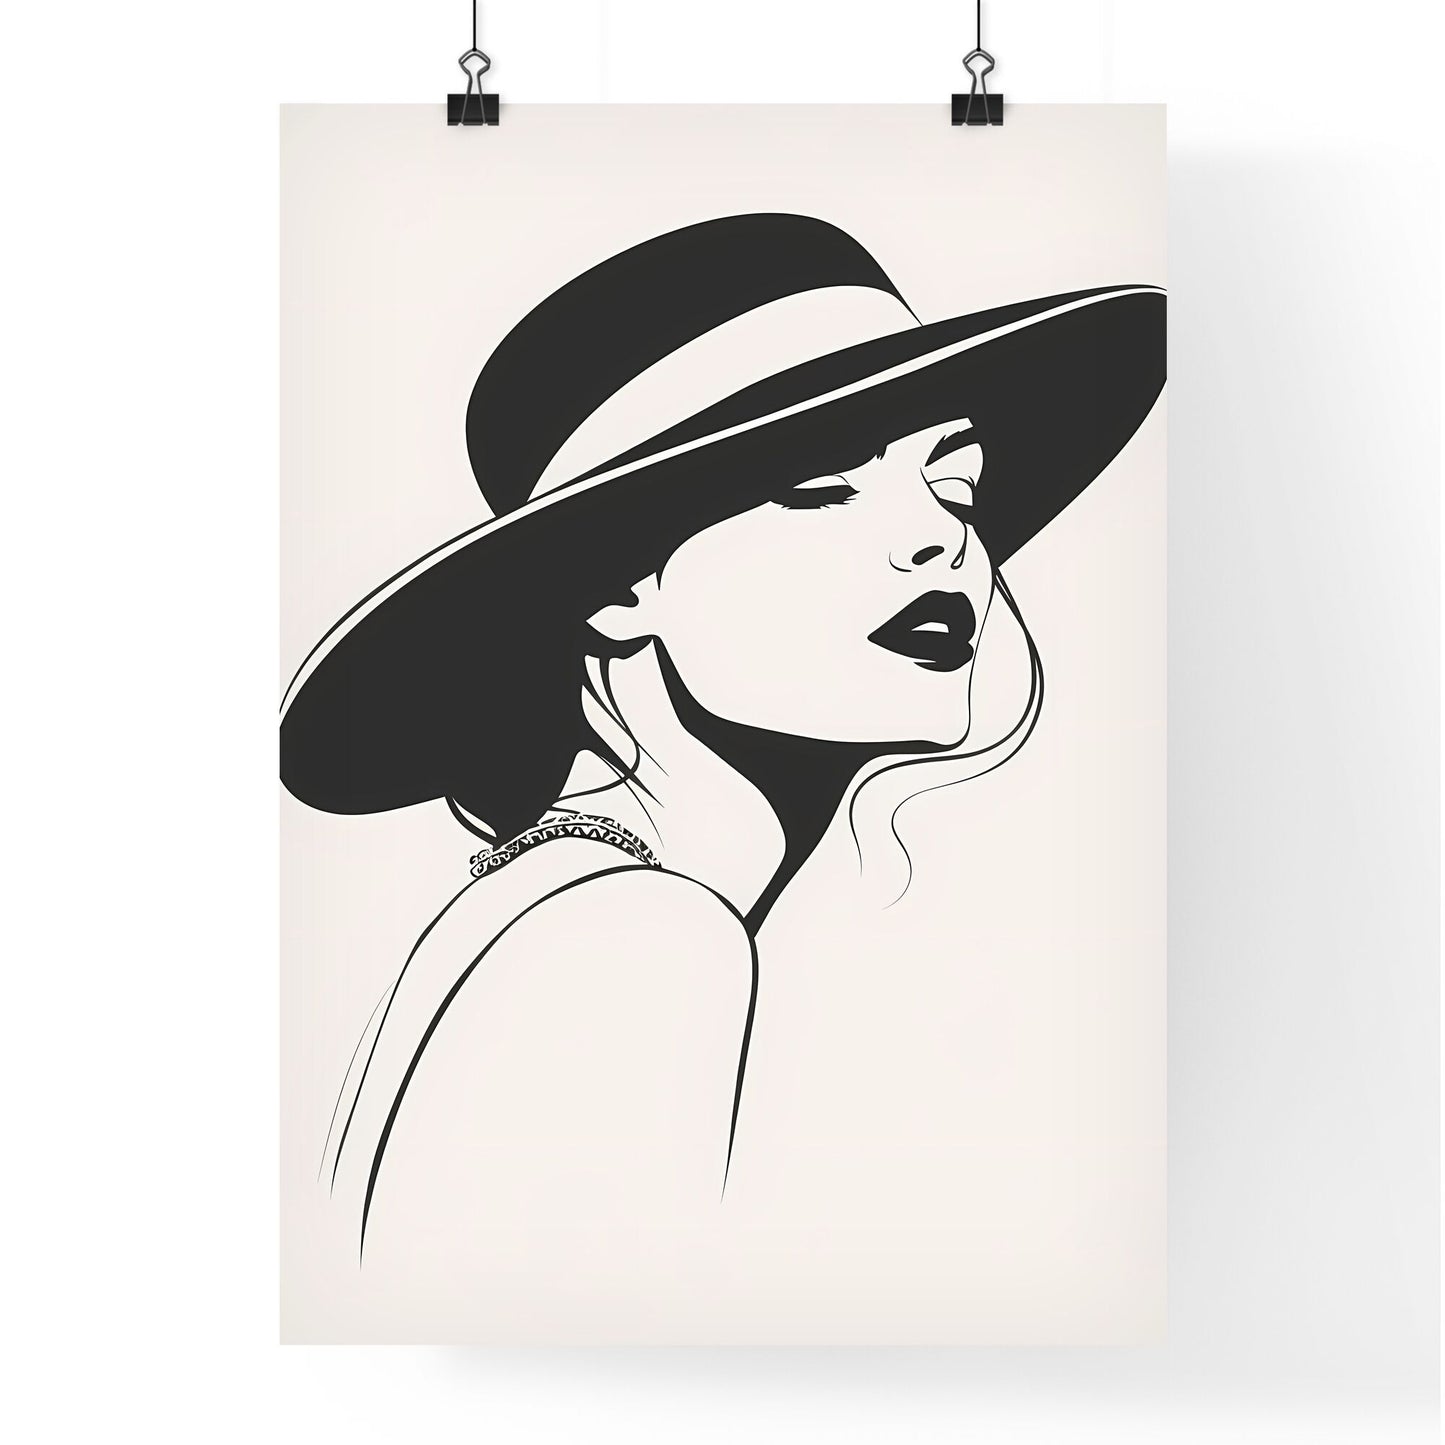 Minimalist Retro Fashion Illustration: Black and White Poster with Hat-Wearing Woman, Vibrant Painting, Art Focus Default Title